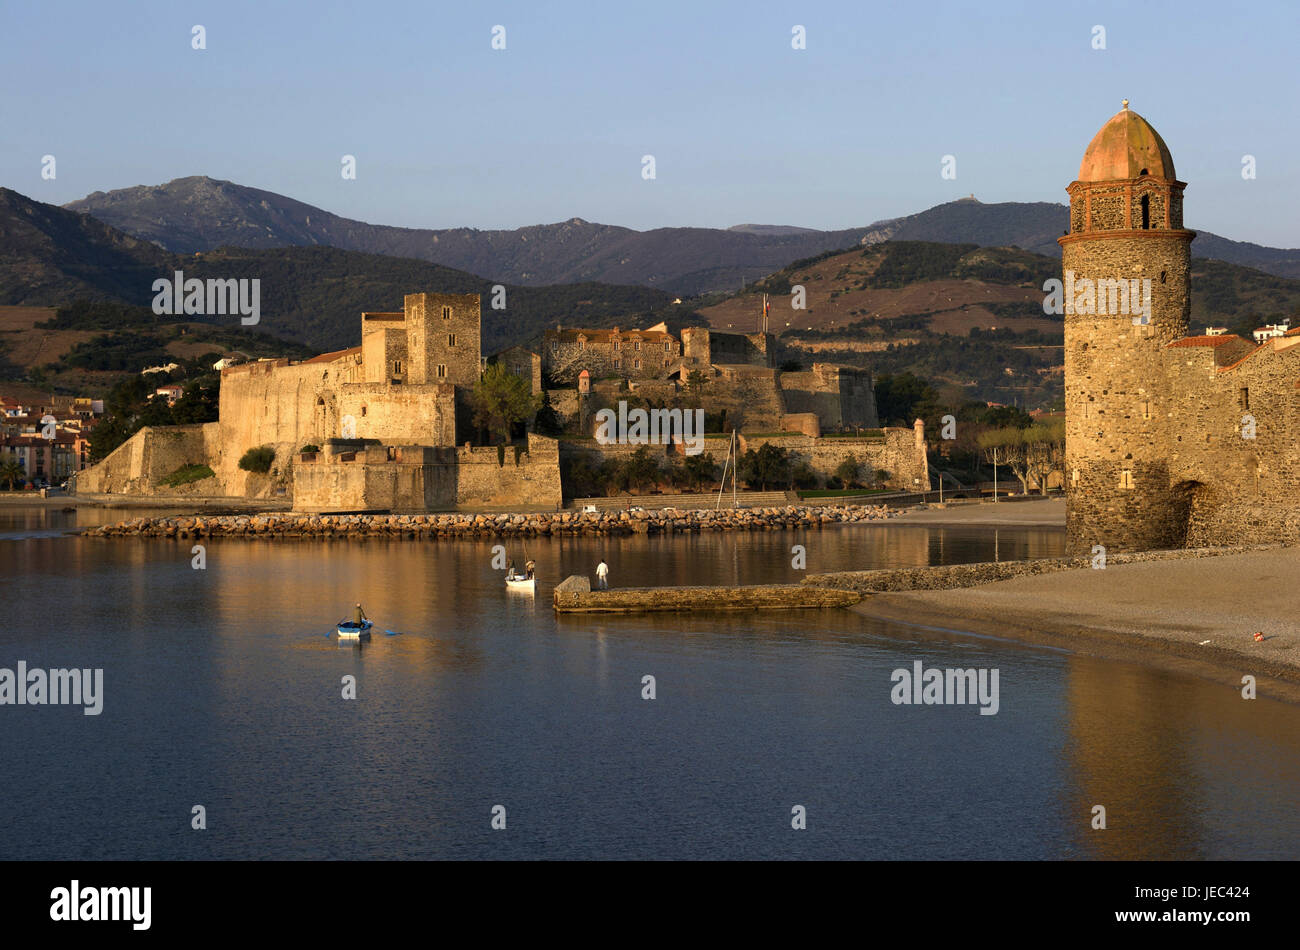 Europe, France, Collioure, Fischer on a boot, in the background on the château royal, Europe, France, Languedoc-Roussillon, Collioure, Département of Pyrénées-East ale, tag, colour picture, person in the background, boat, boats, fishing boat, fishing boats, architecture, building, structure, structures, lock, locks, traditional culture, waters, water, sea, the Mediterranean Sea, scenery, sceneries, coast, coastal scenery, coastal sceneries, coasts, ocean, oceans, geography, travel, destination, holiday destination, tourism, tourism, parish, parishes, place, places, town, towns, town view, Stock Photo